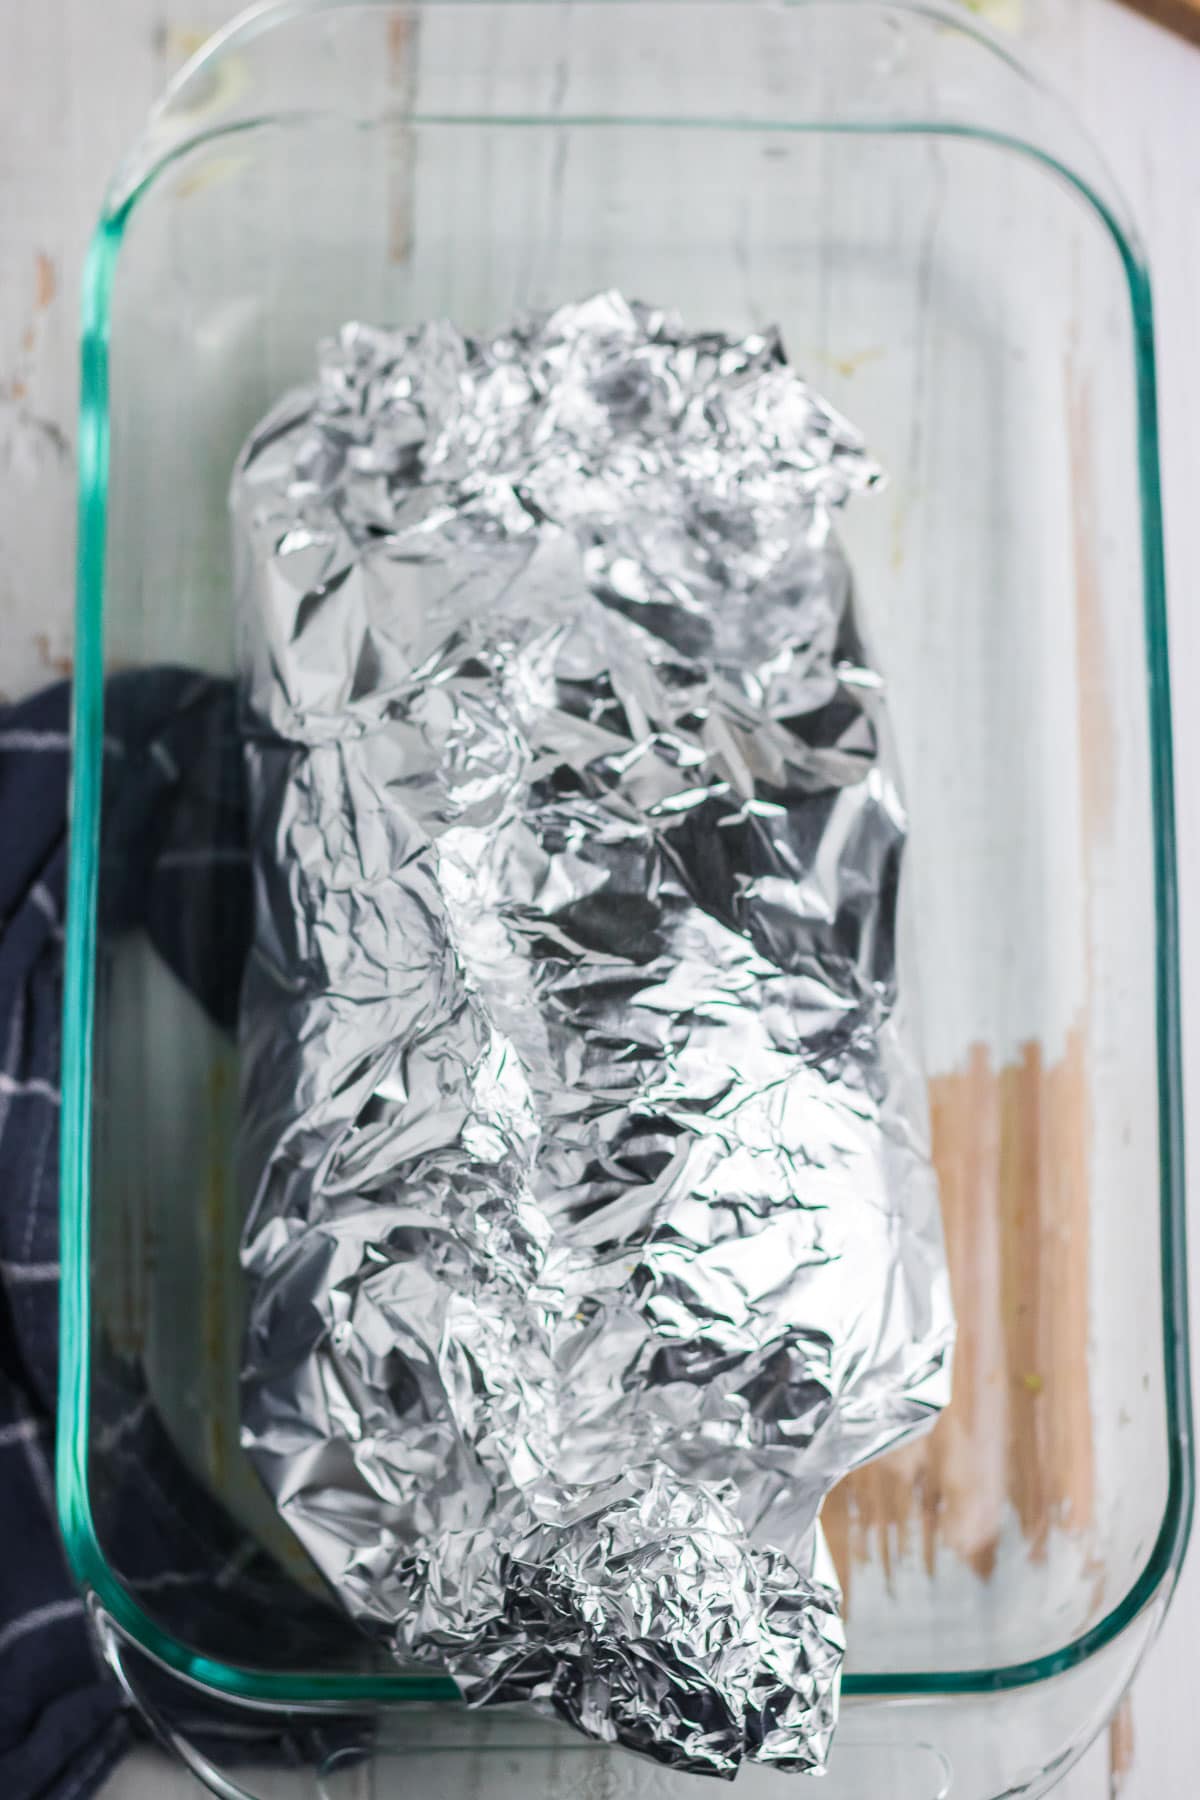 Brisket wrapped tightly in foil.